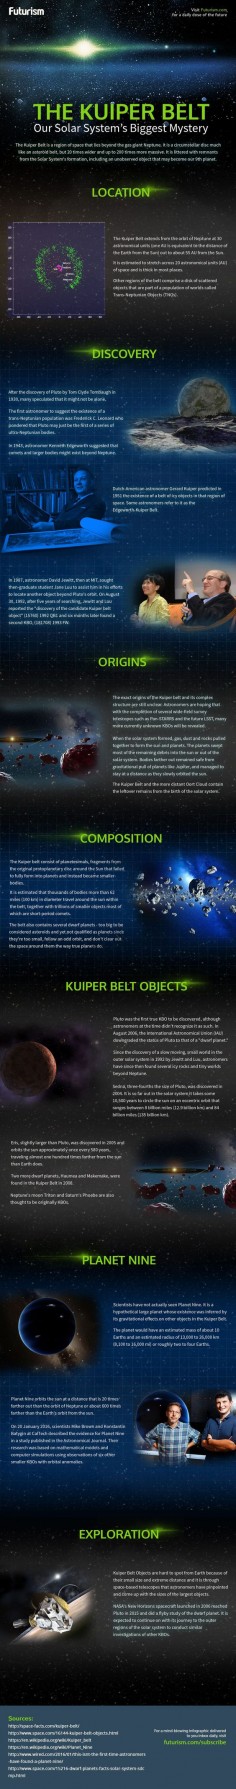 The Kuiper Belt: One of Our Solar System’s Biggest Mysteries